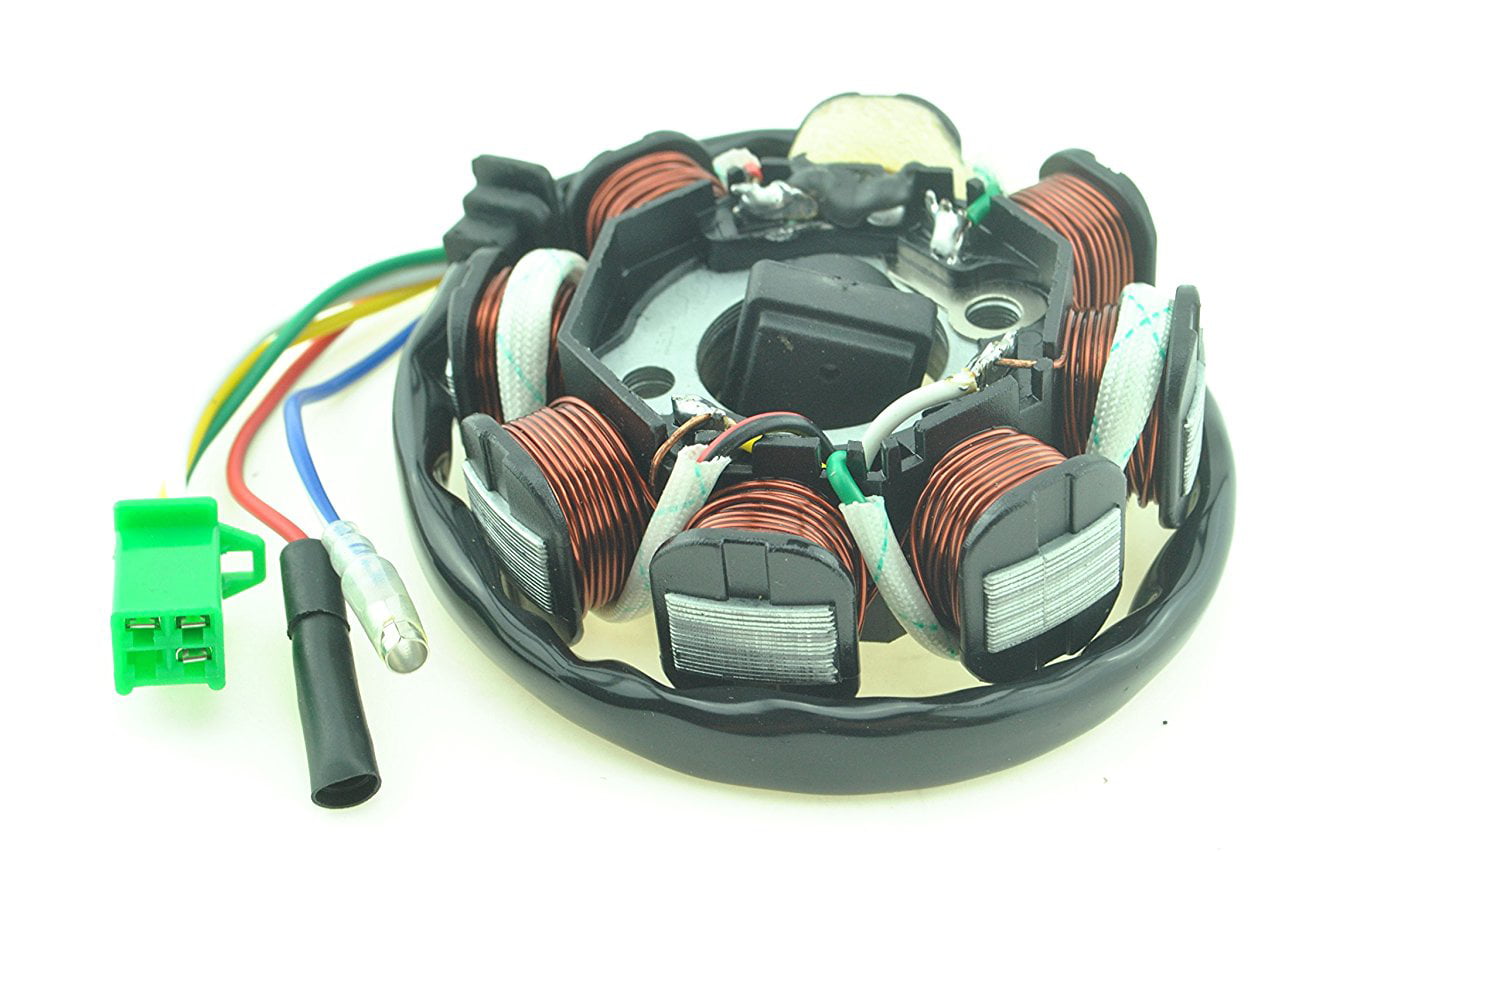 MAGNETO STATOR 6 COIL POLE For GY6 150cc SCOOTER ATV 